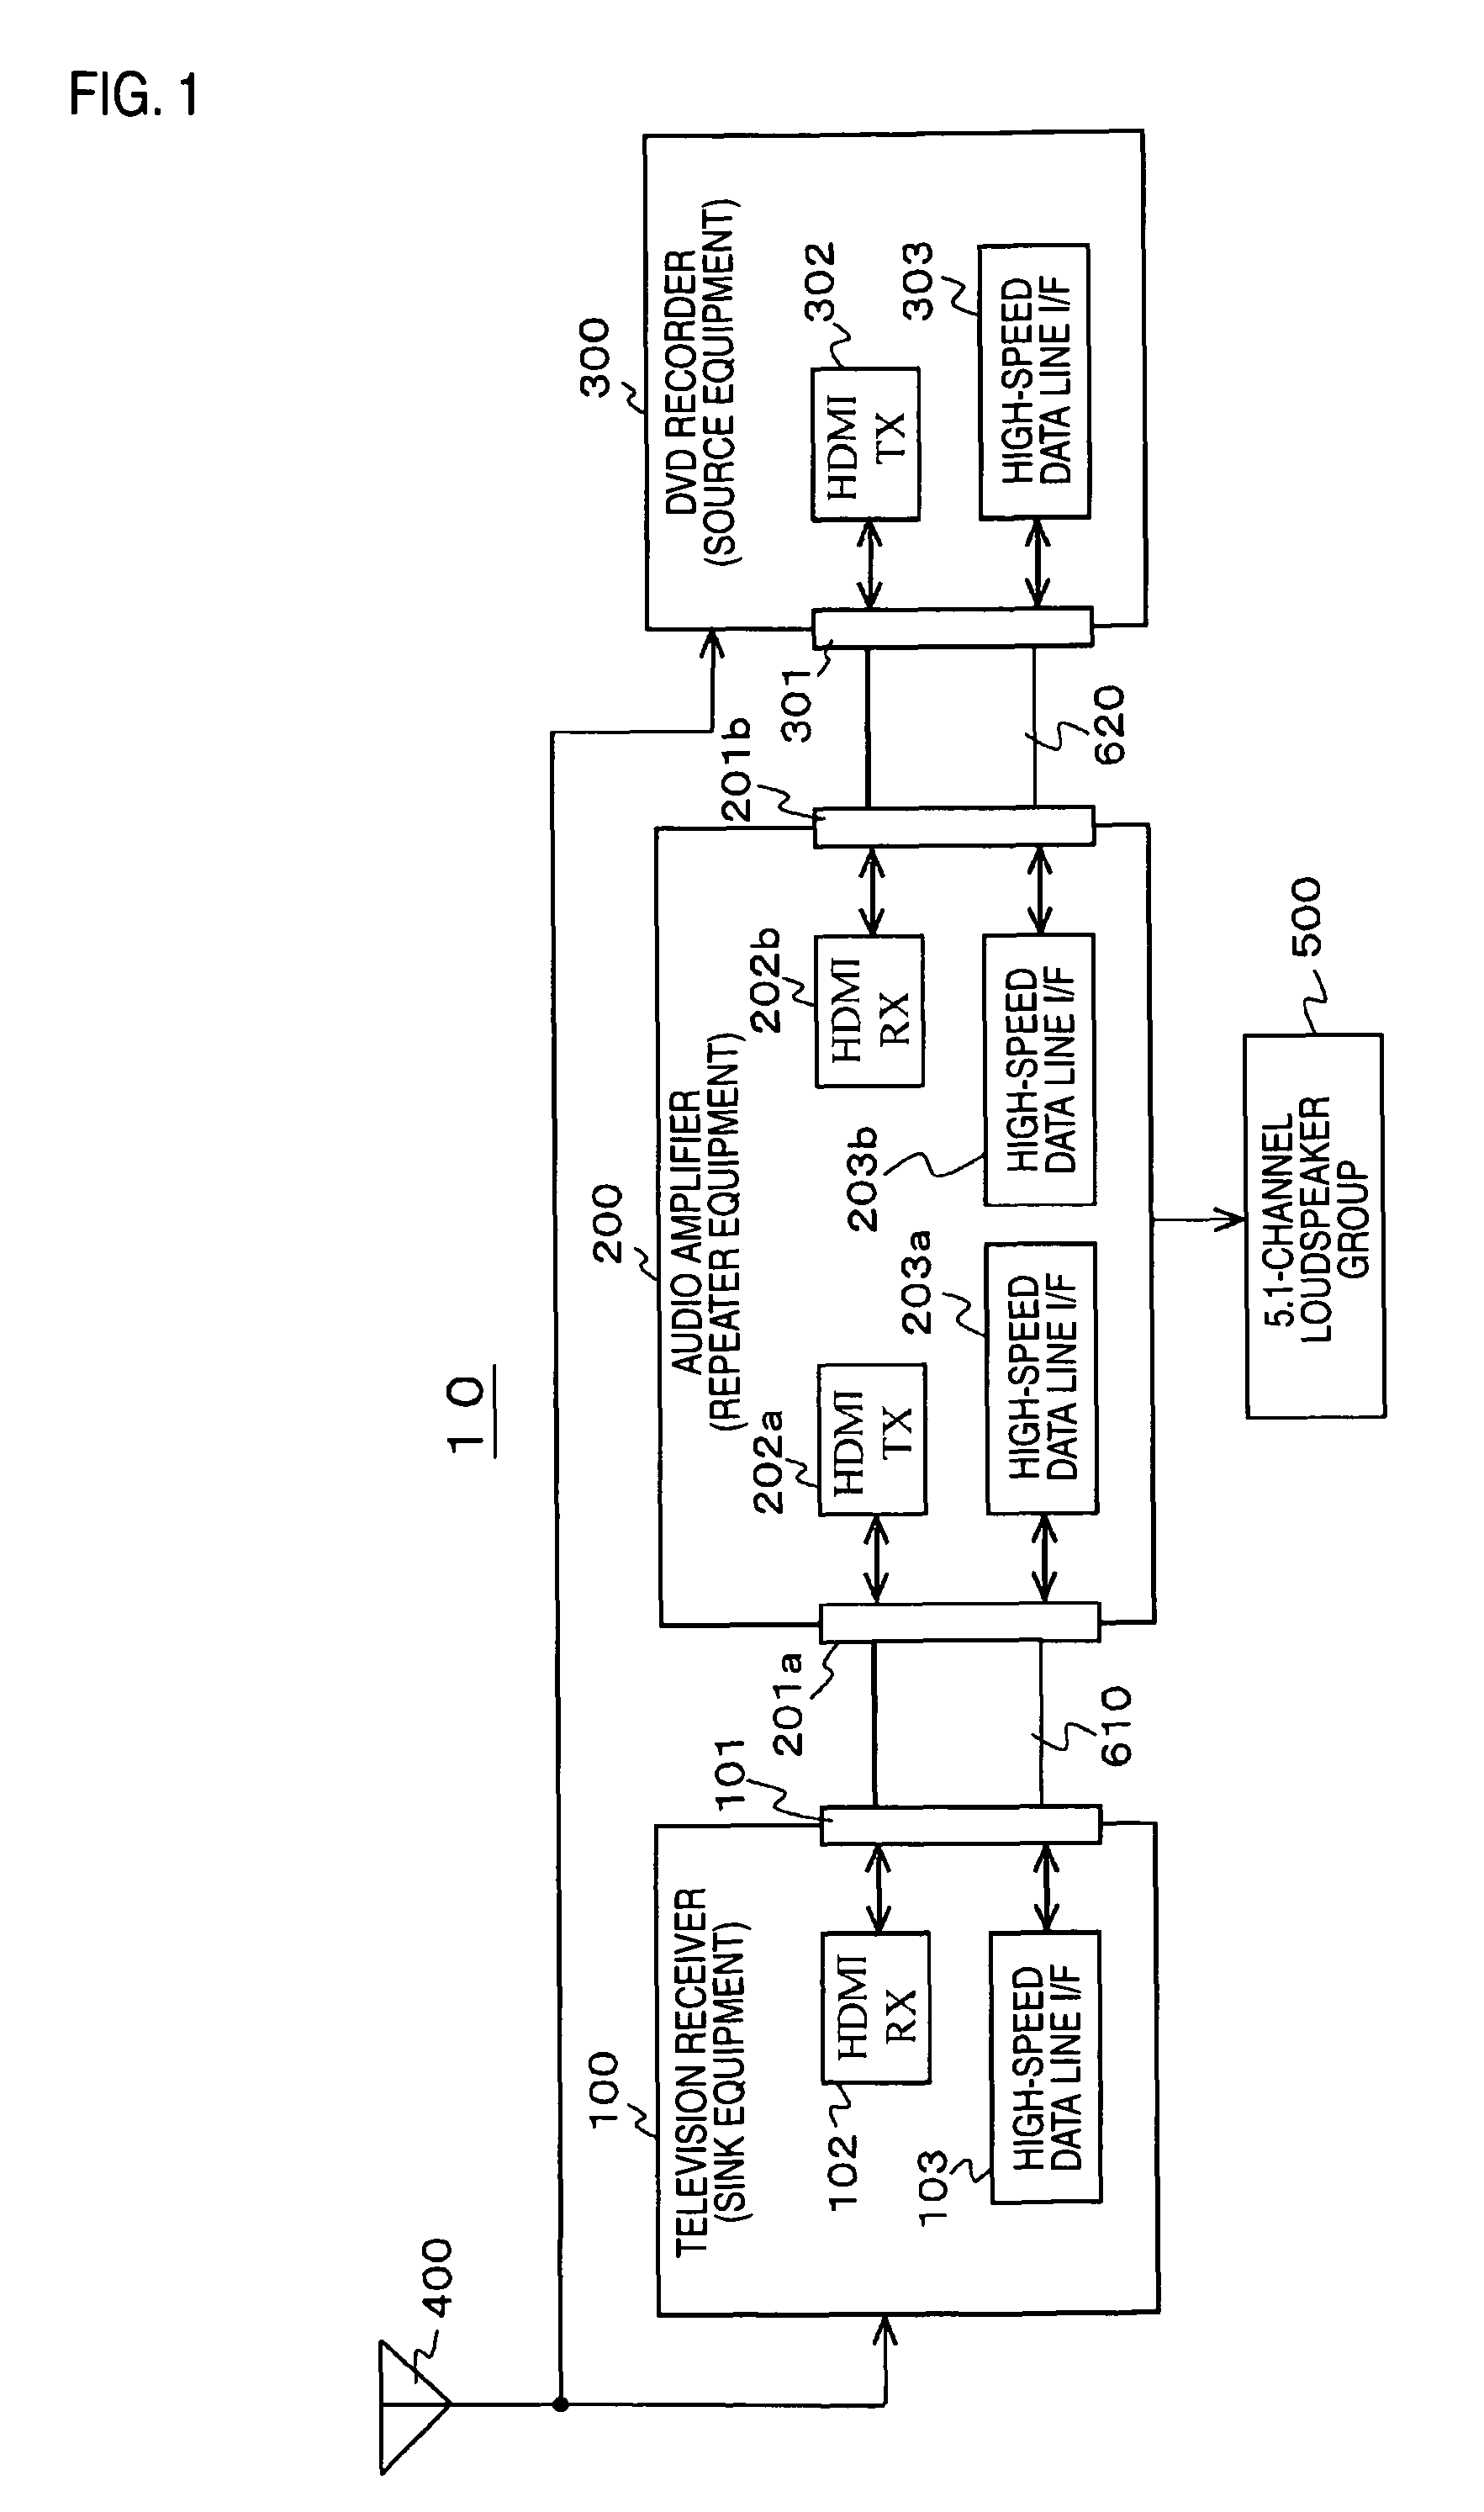 Electronic equipment, control information transmission and reception methods having bidirectional communication using predetermined lines